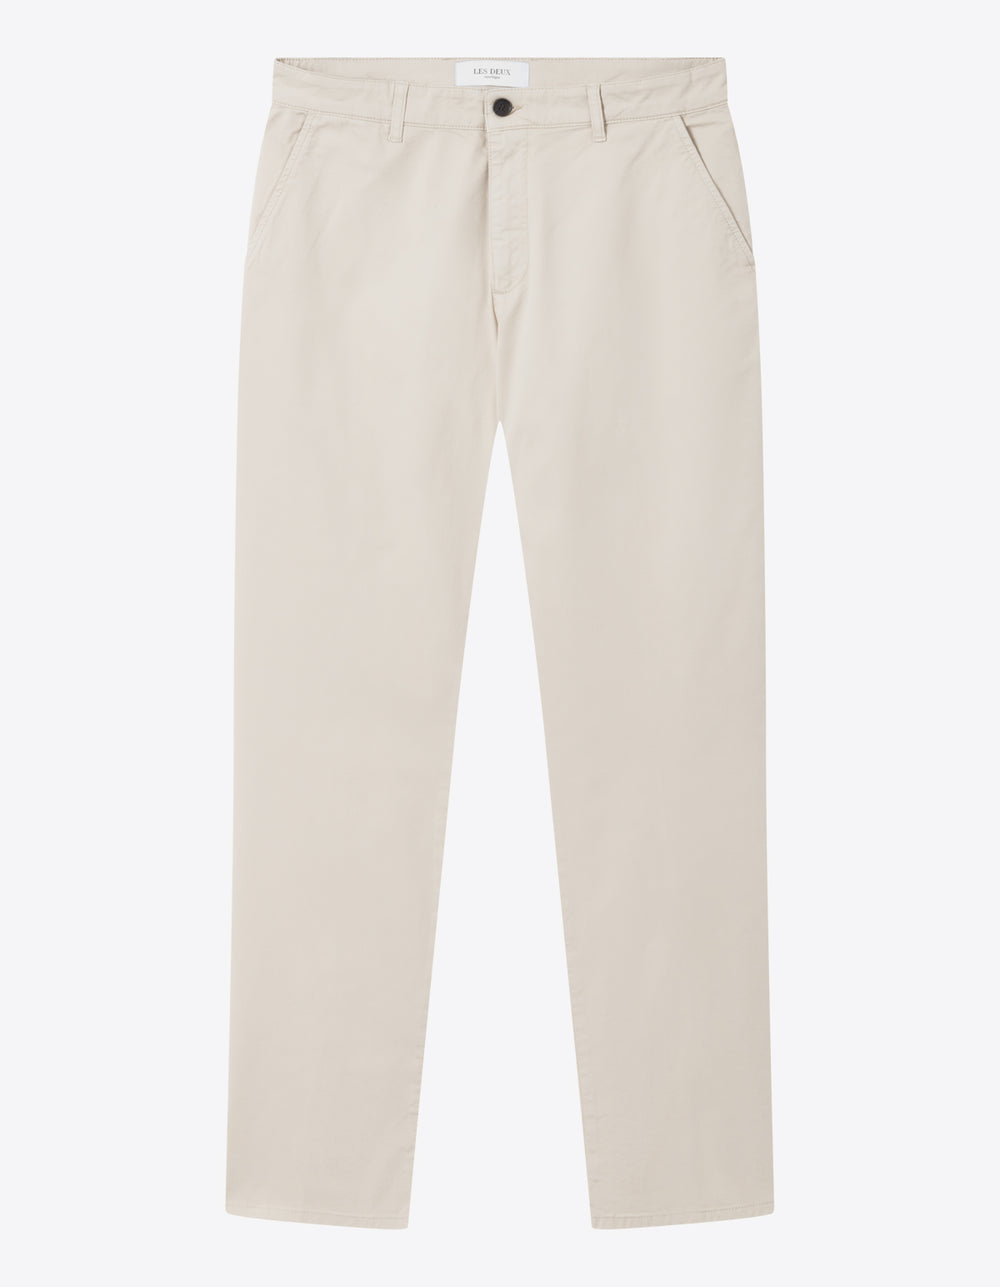 PAUL COTTON PANTS - OYSTER GRAY